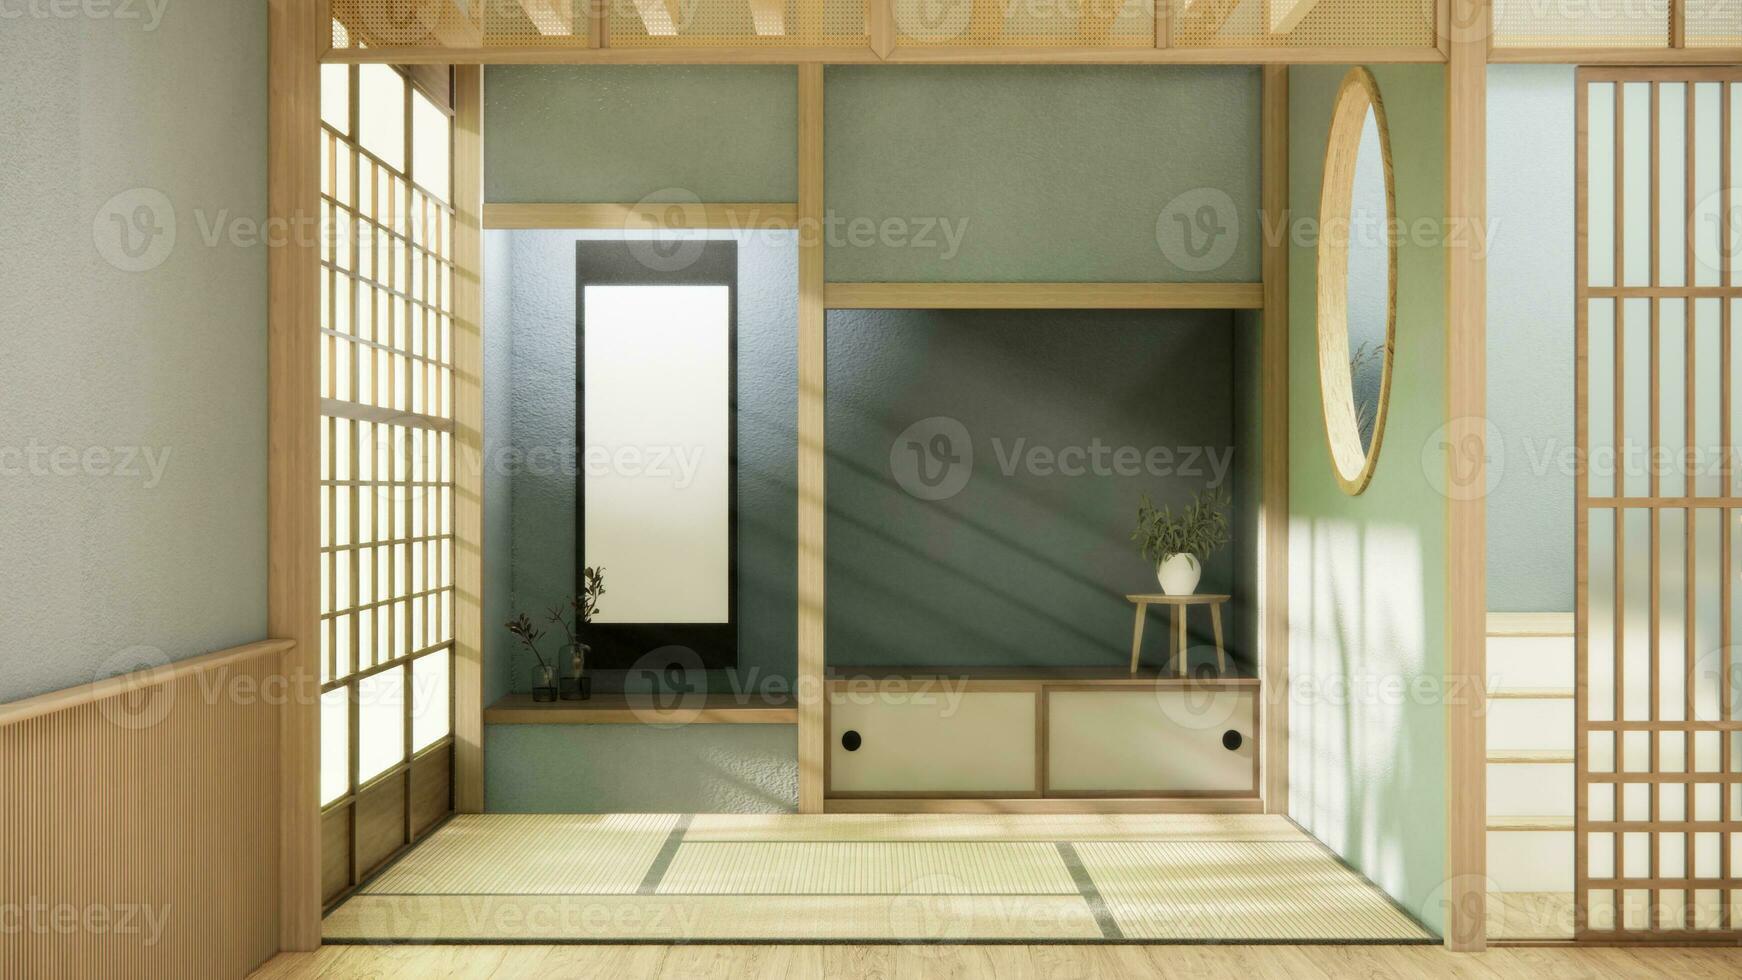 Nihon room design interior with door paper and wall room japanese style. photo